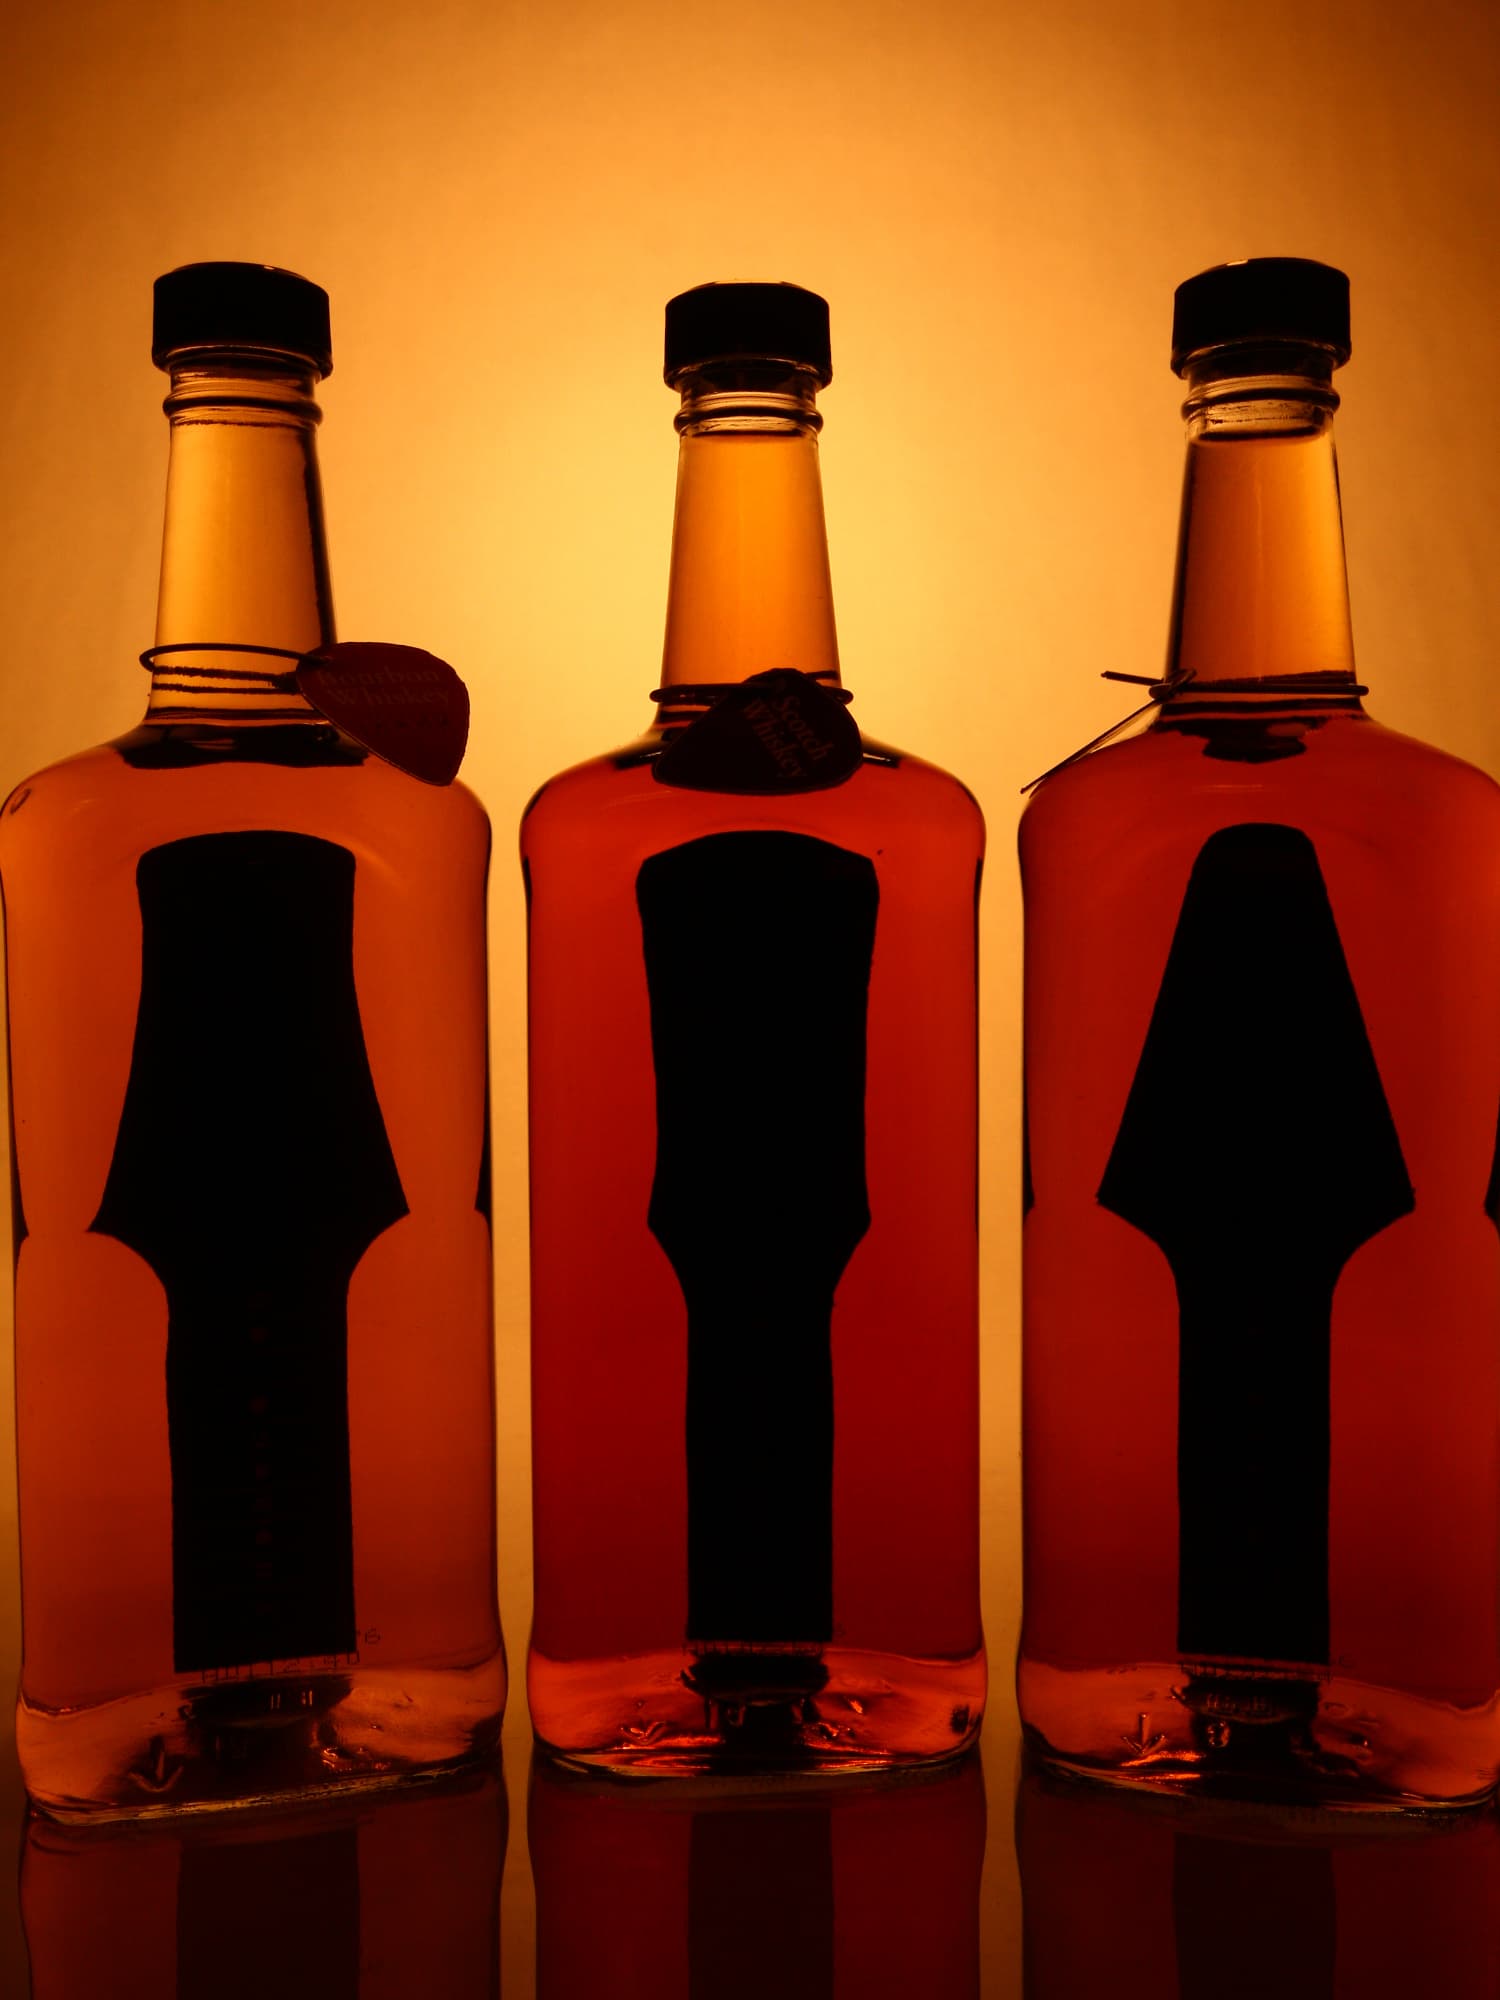 A photo of 3 bottles of whiskey